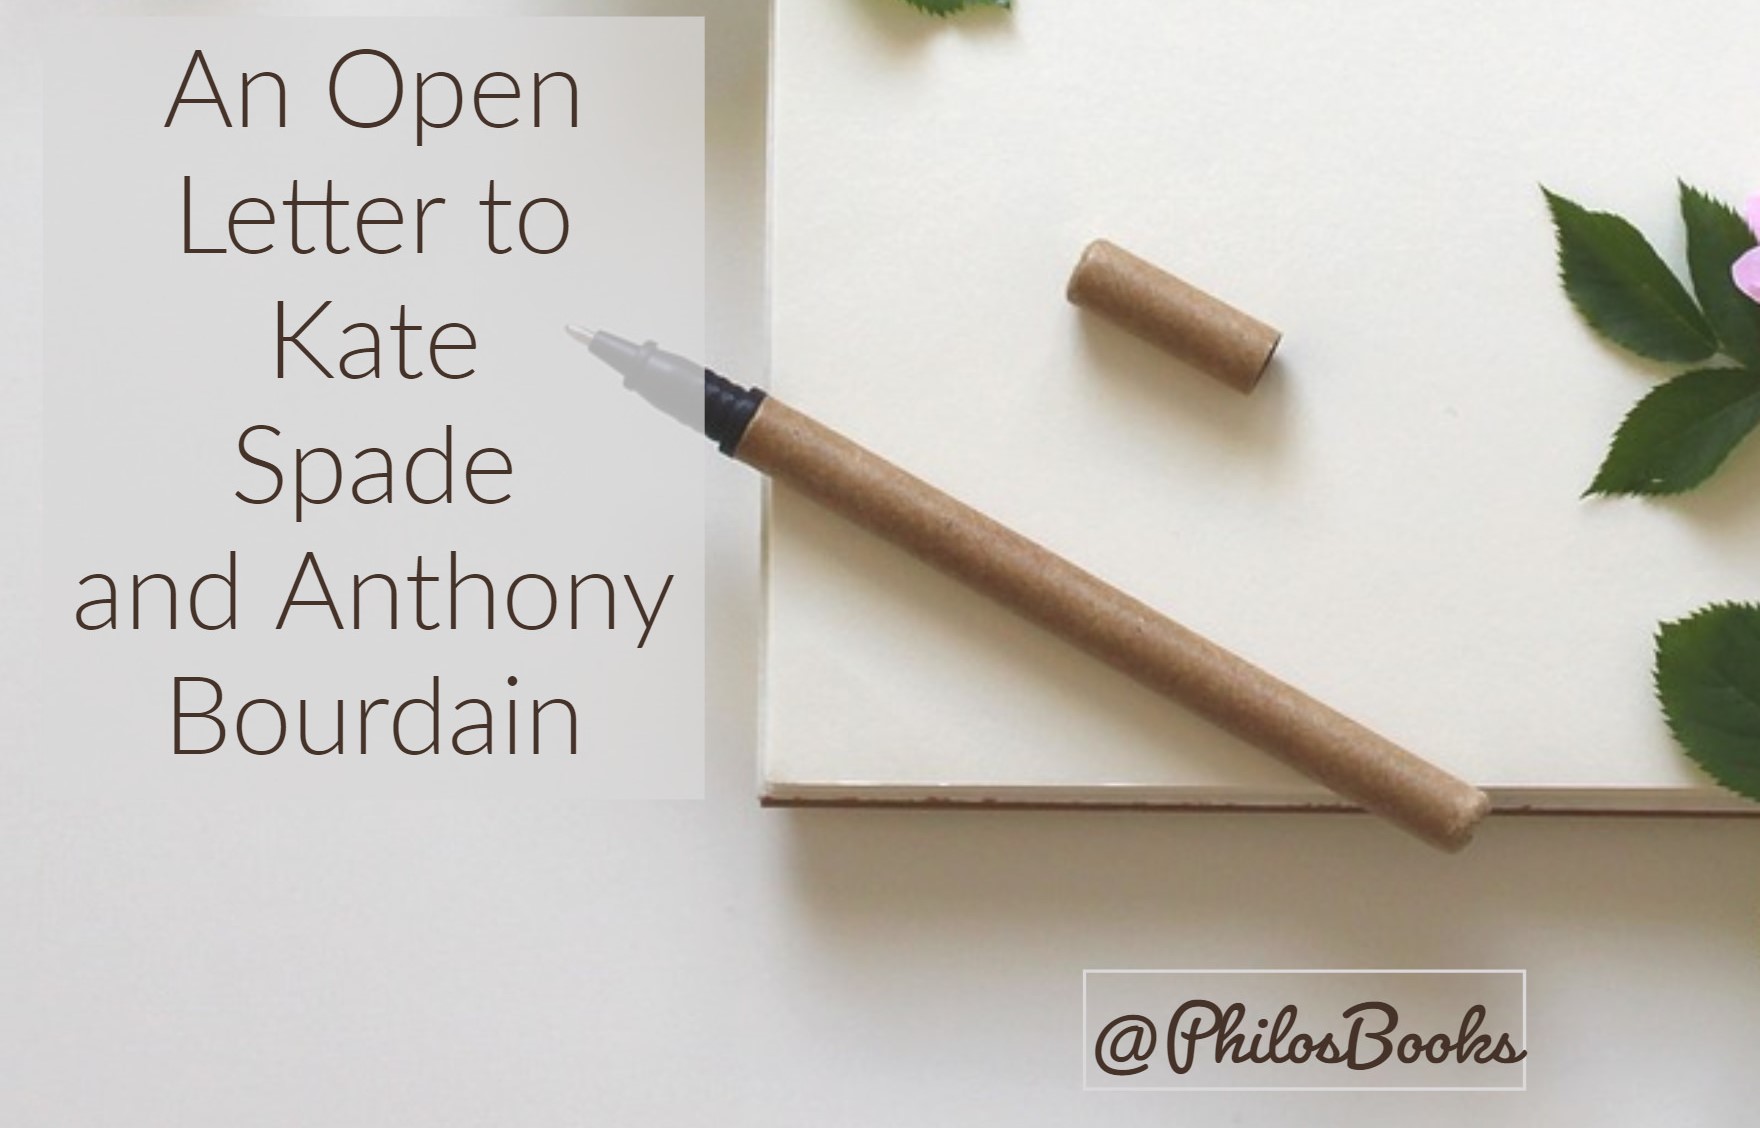 An Open Letter to Kate Spade and Anthony Bourdain